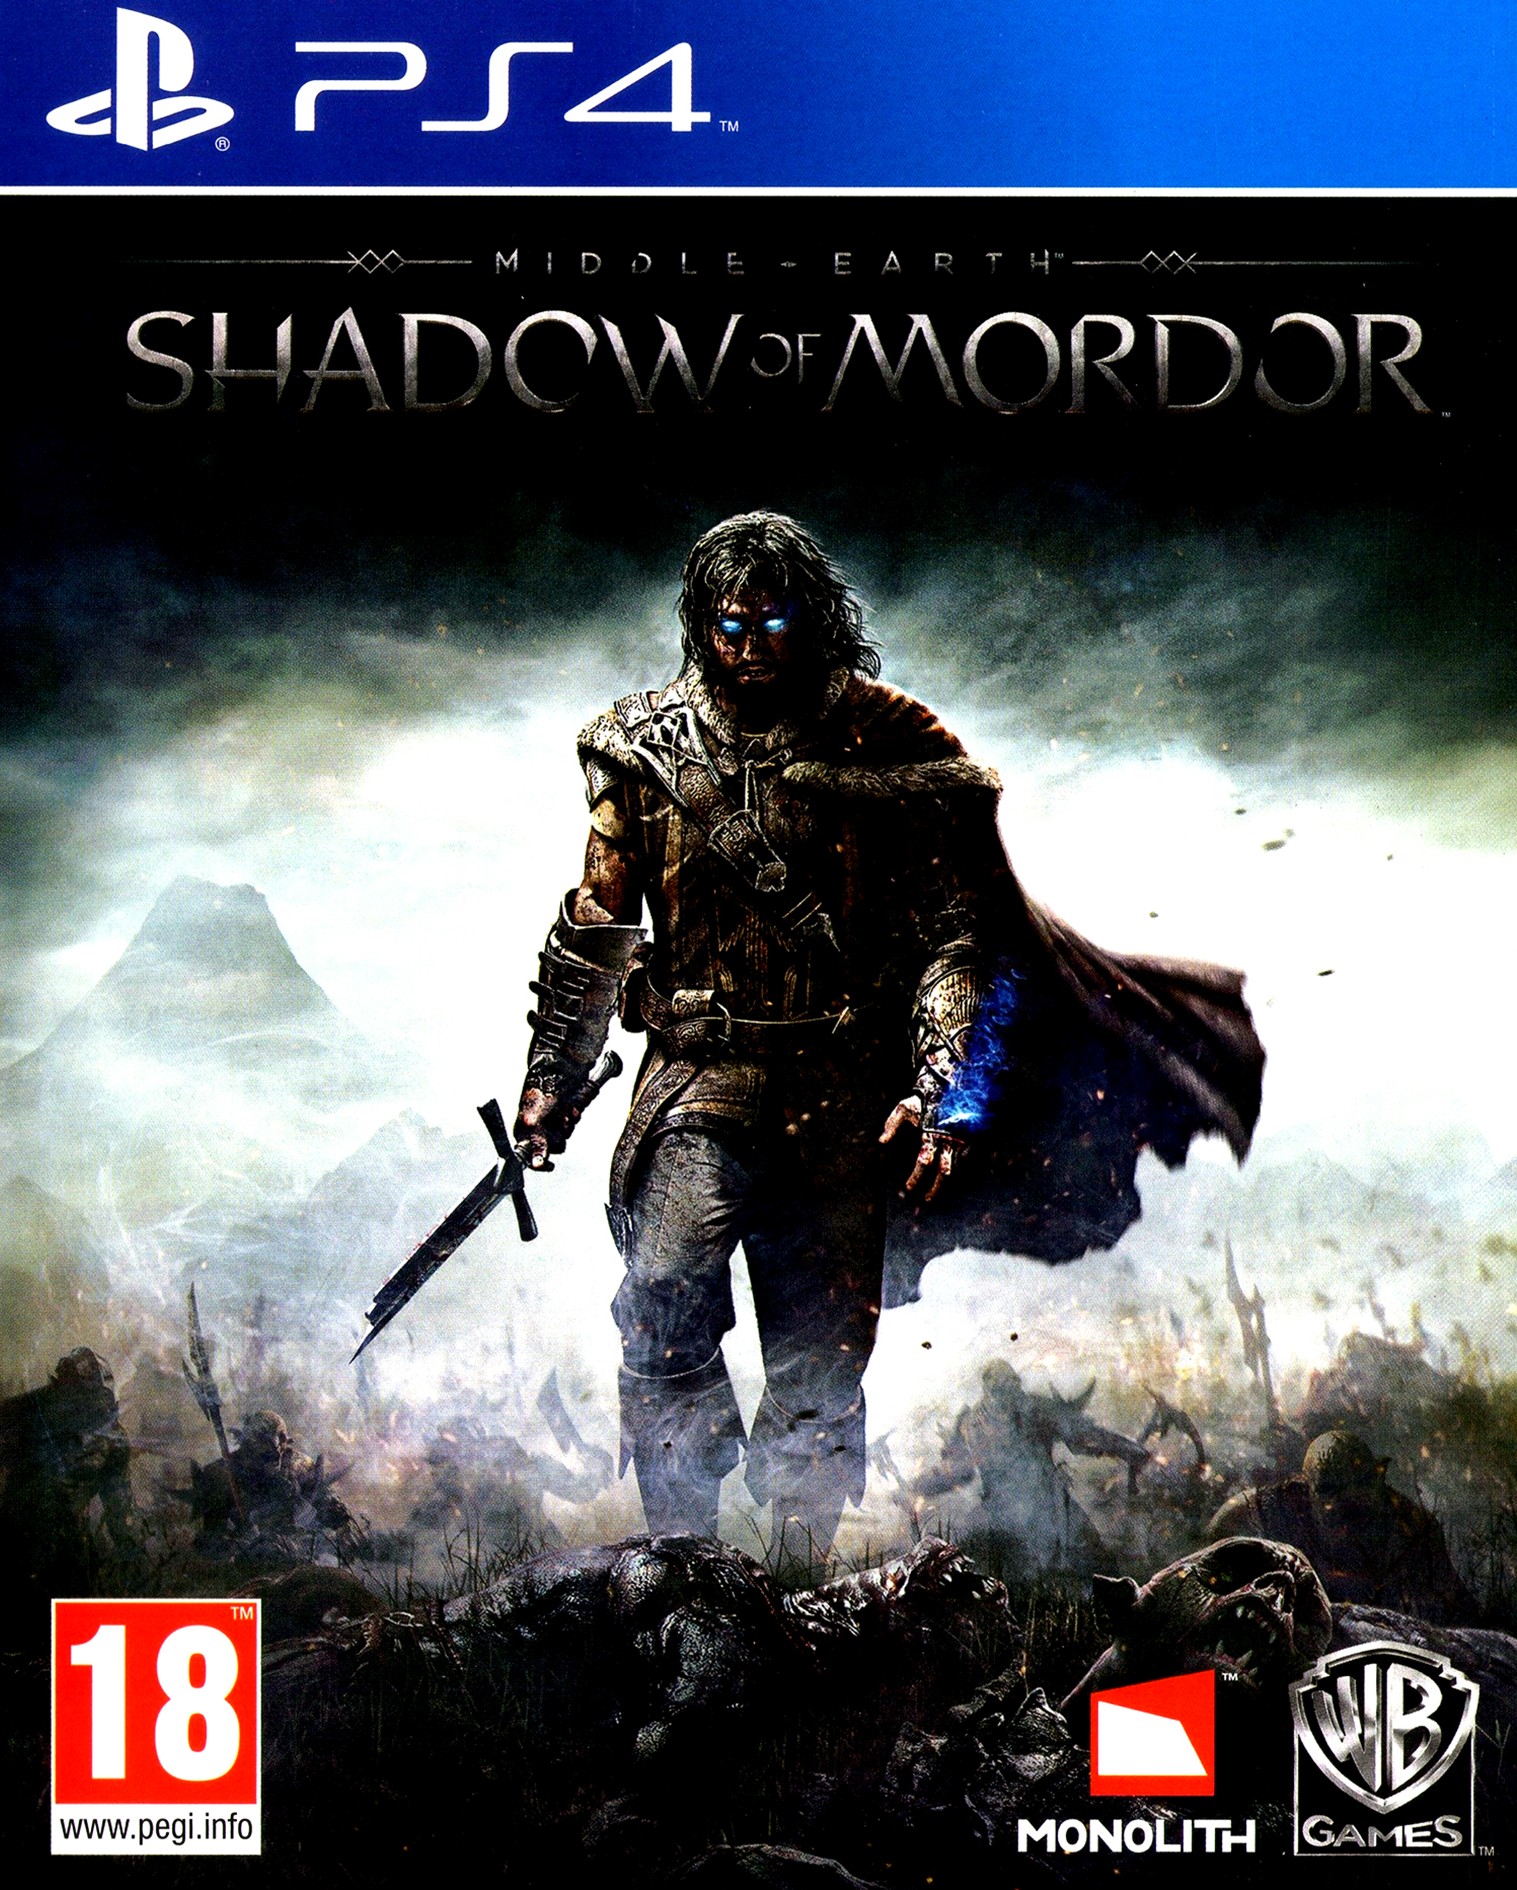 'Middle Earth: Shadow of Mordor'